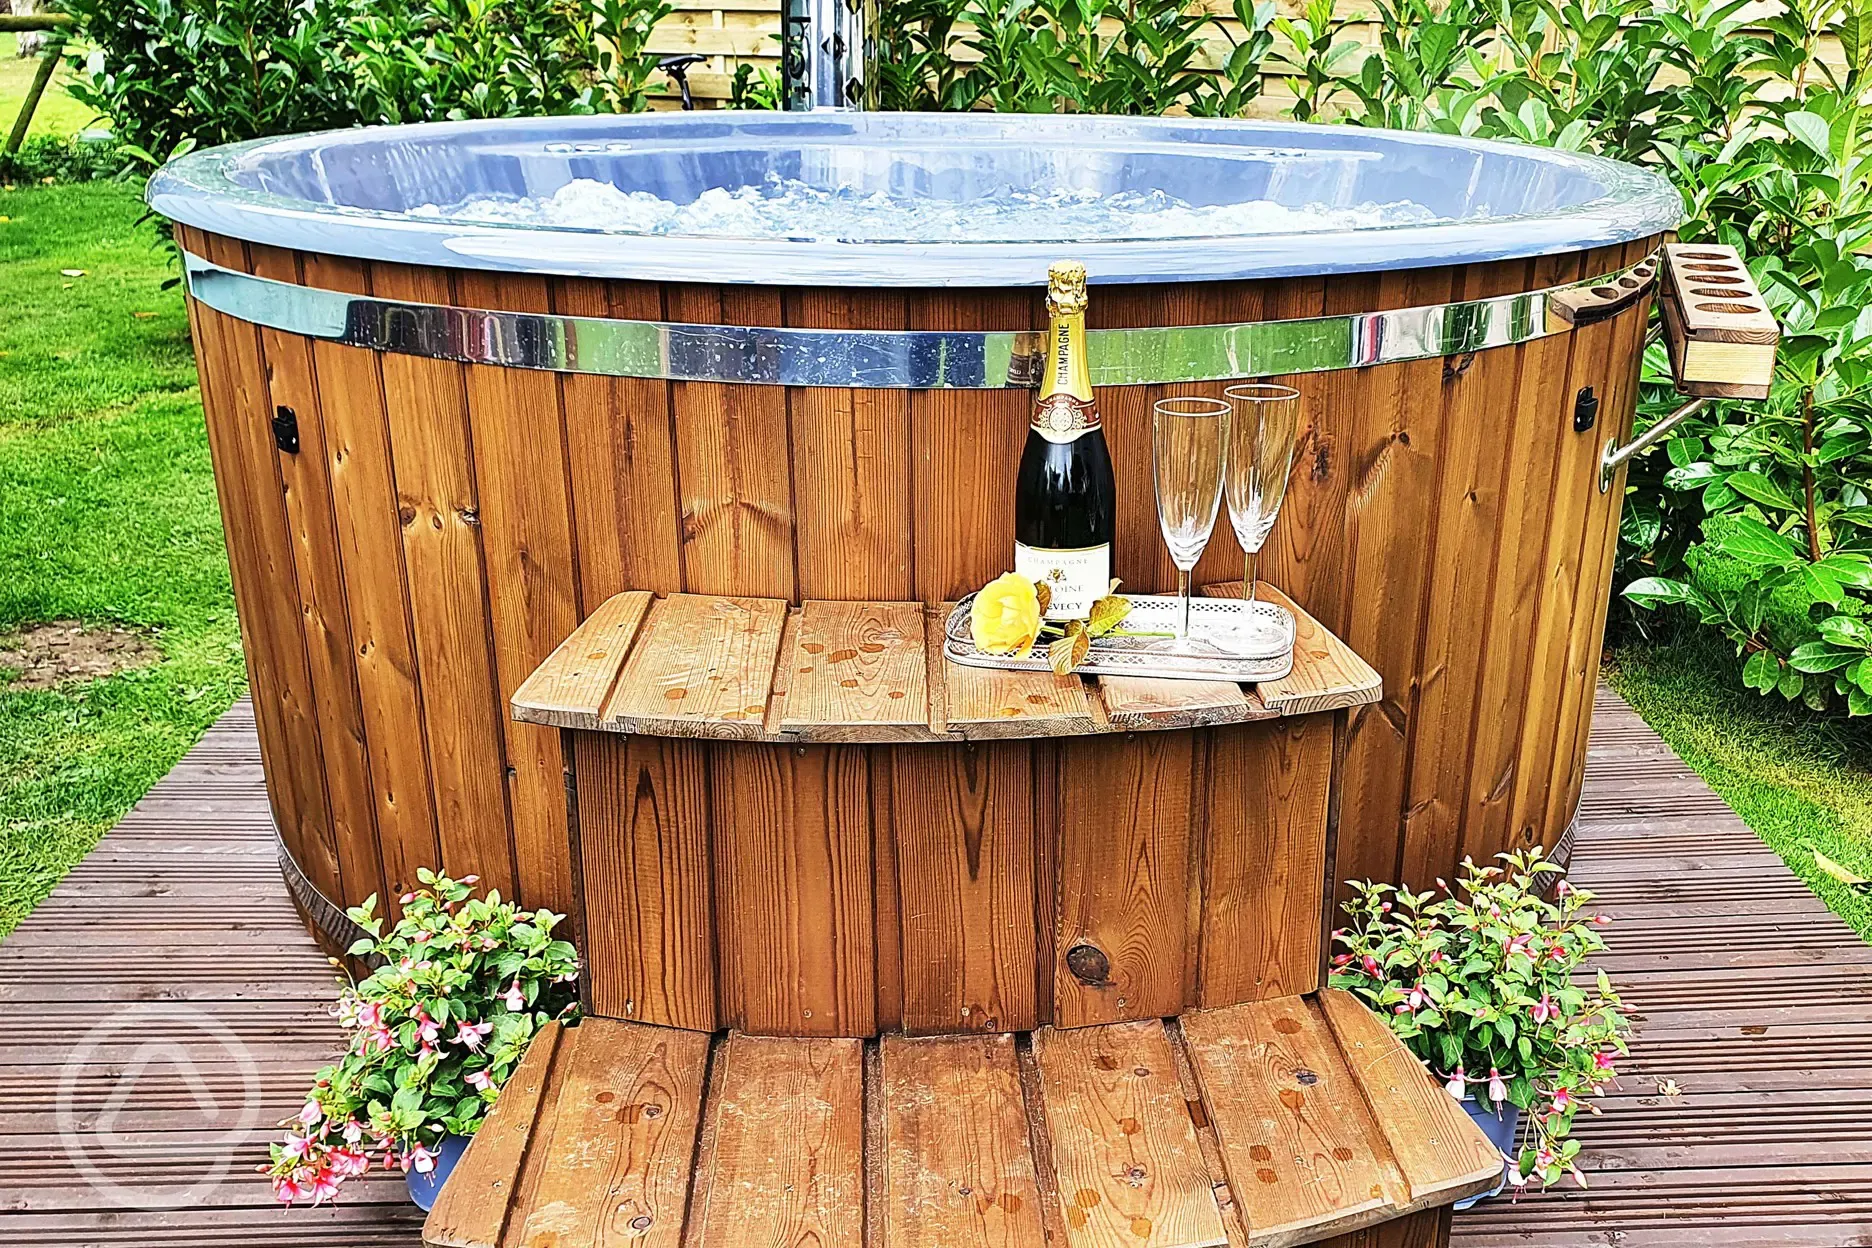 Our bubbling hot tub!